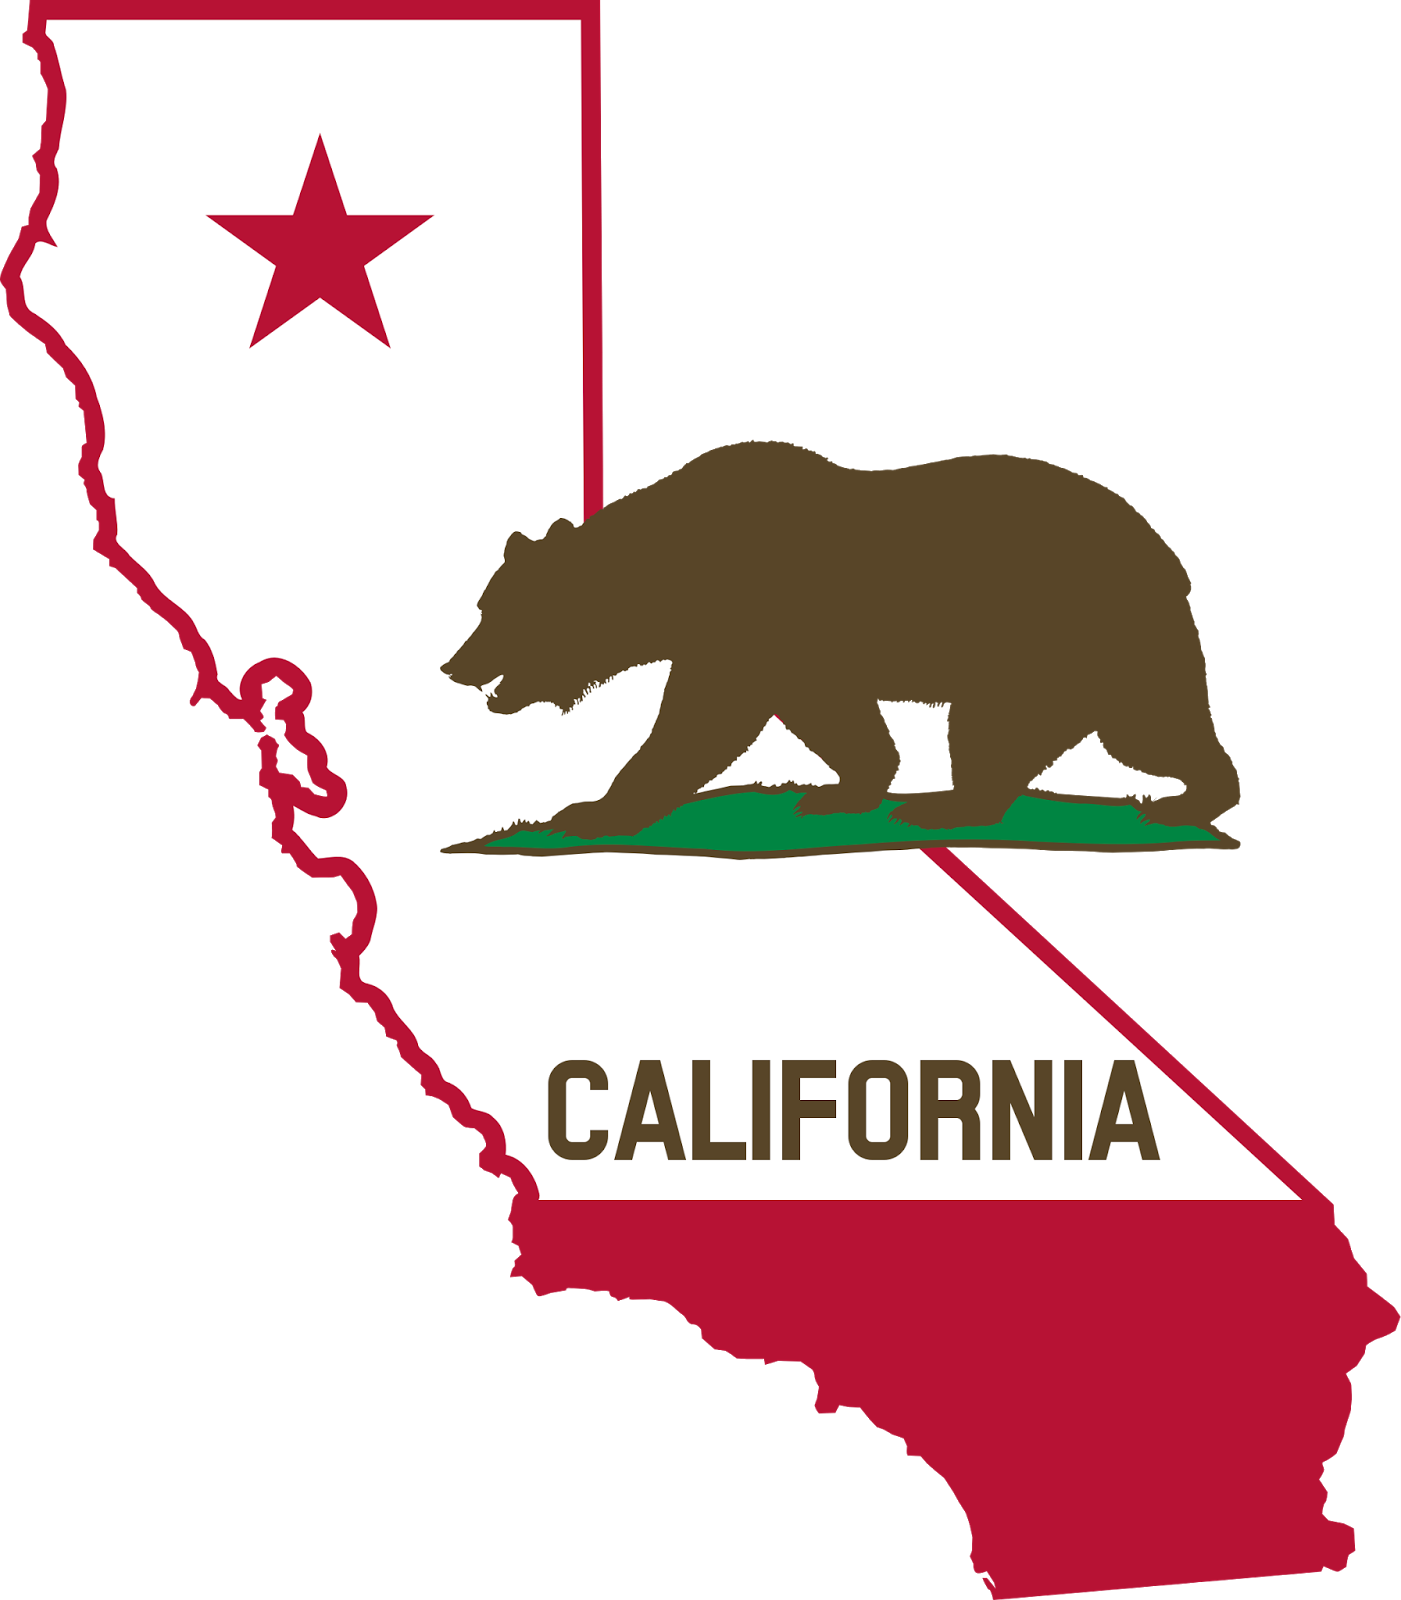 http://3.bp.blogspot.com/--v59FgET6XA/VahnCZ35oWI/AAAAAAAAQFQ/vSnXdSXrX38/s1600/California-Outline-and-Flag-Solid.png